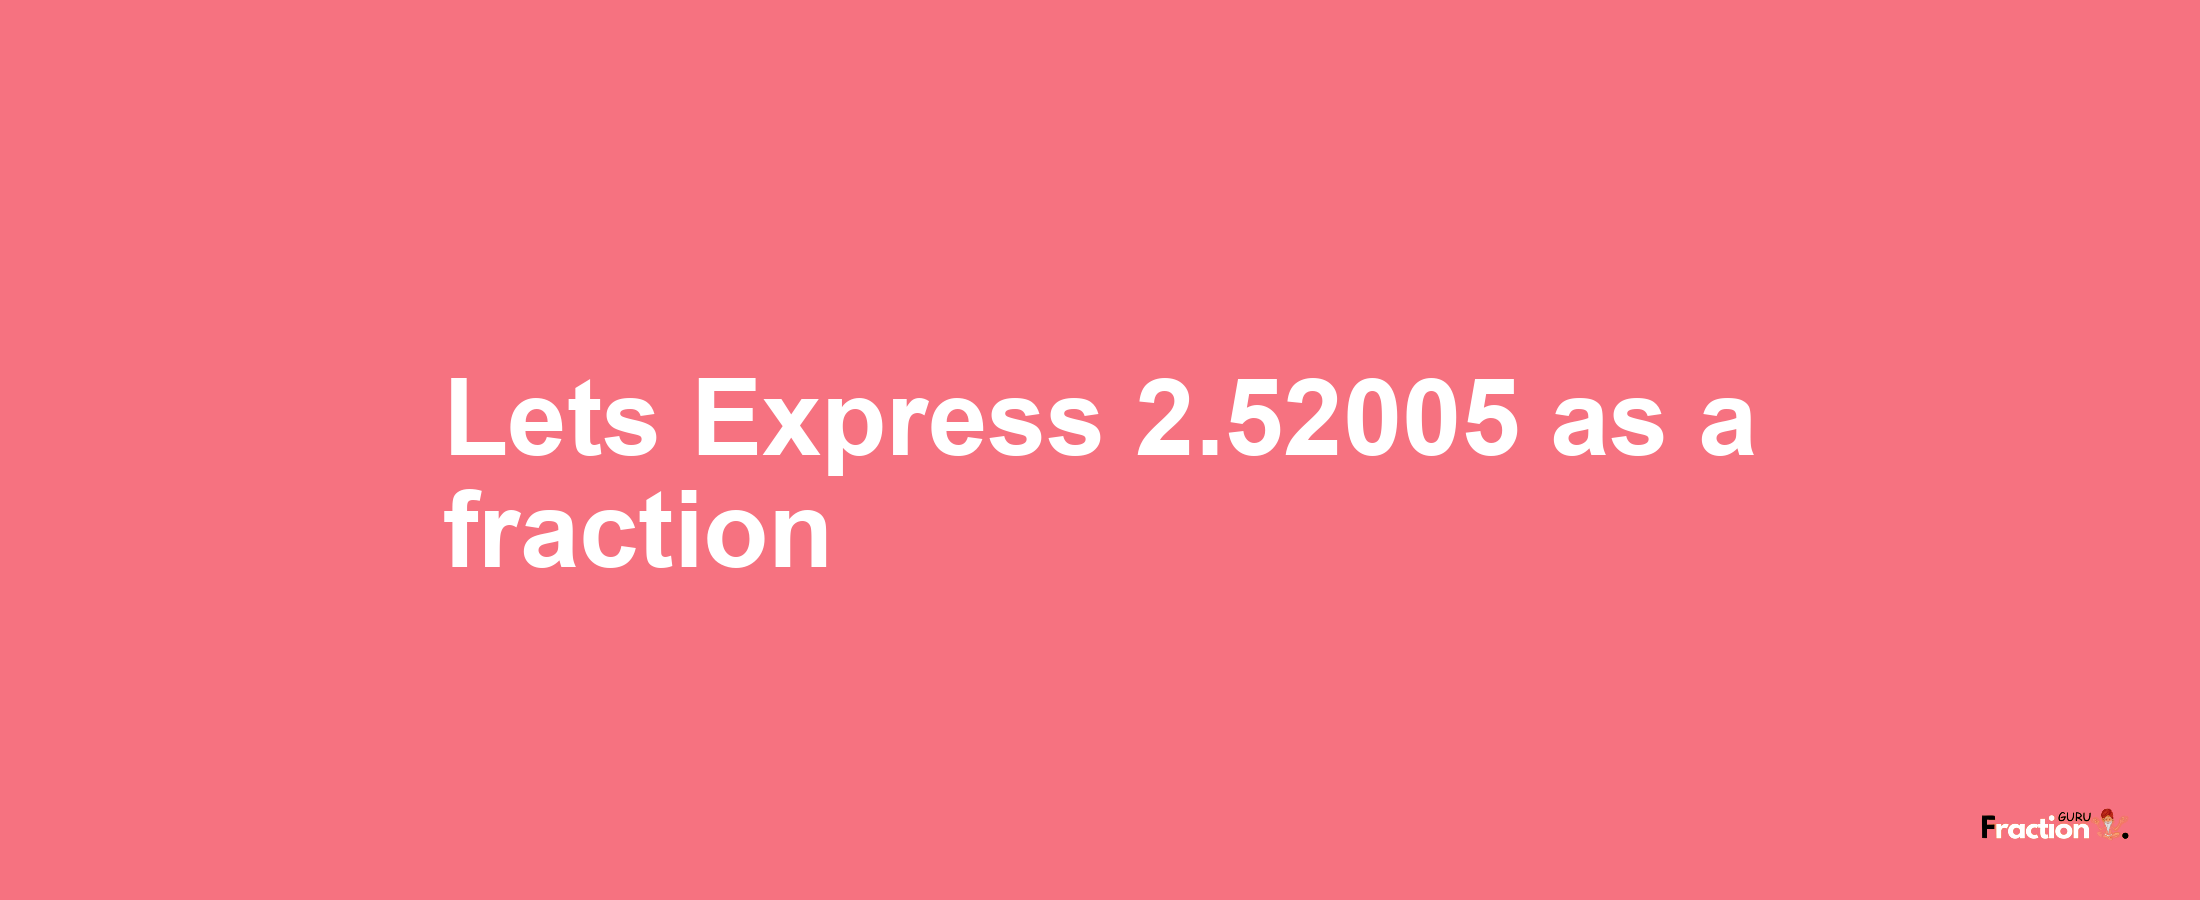 Lets Express 2.52005 as afraction